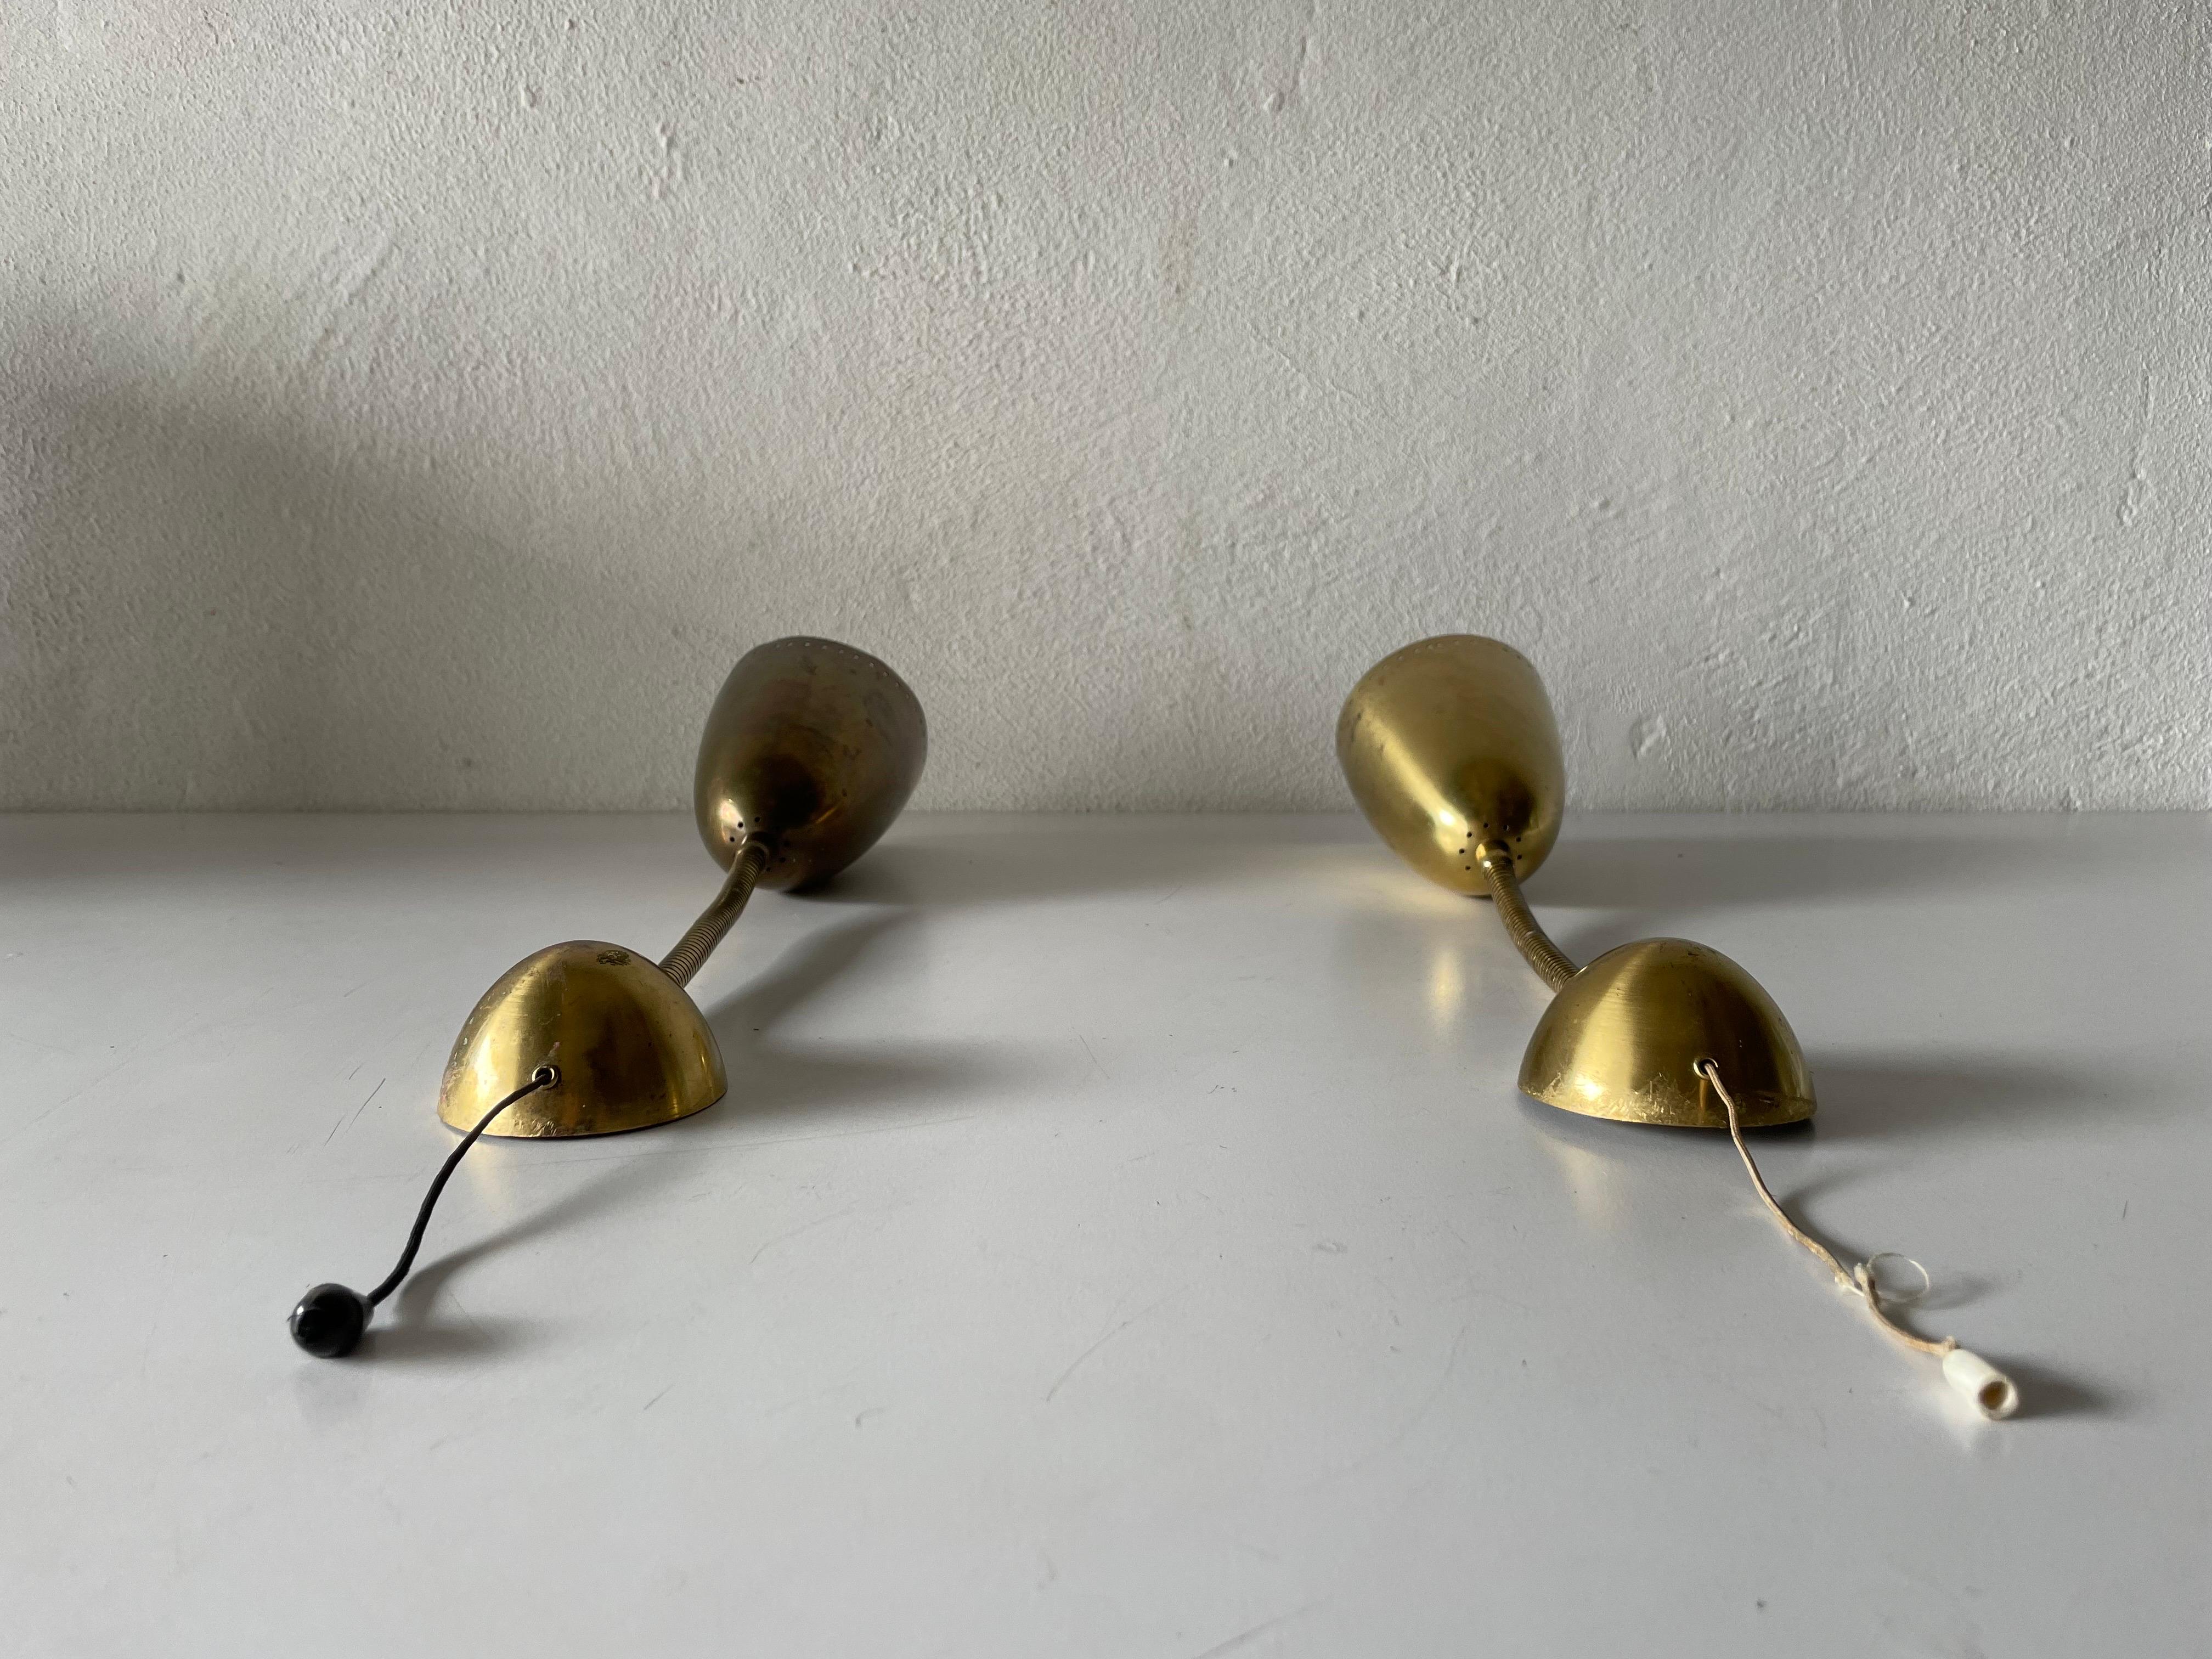 Brass Mid-Century Modern Gold Metal Pair of Sconces, 1950s, Germany